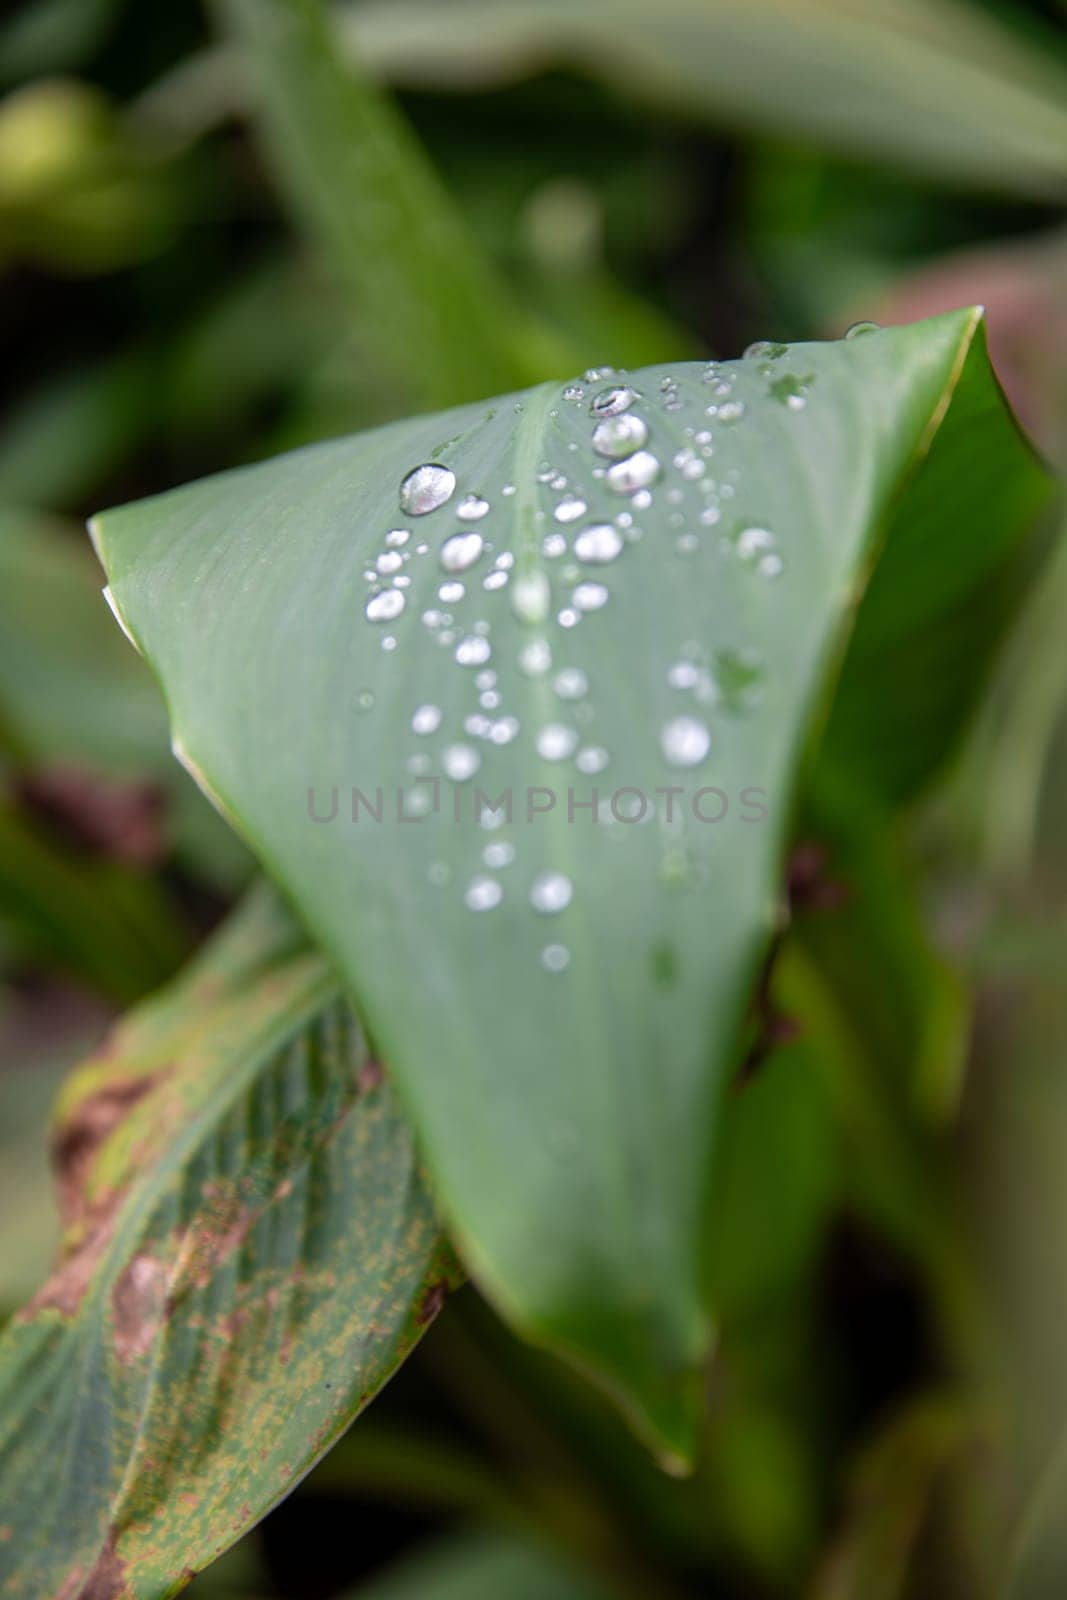 Morning droplets on a leaf in a garden